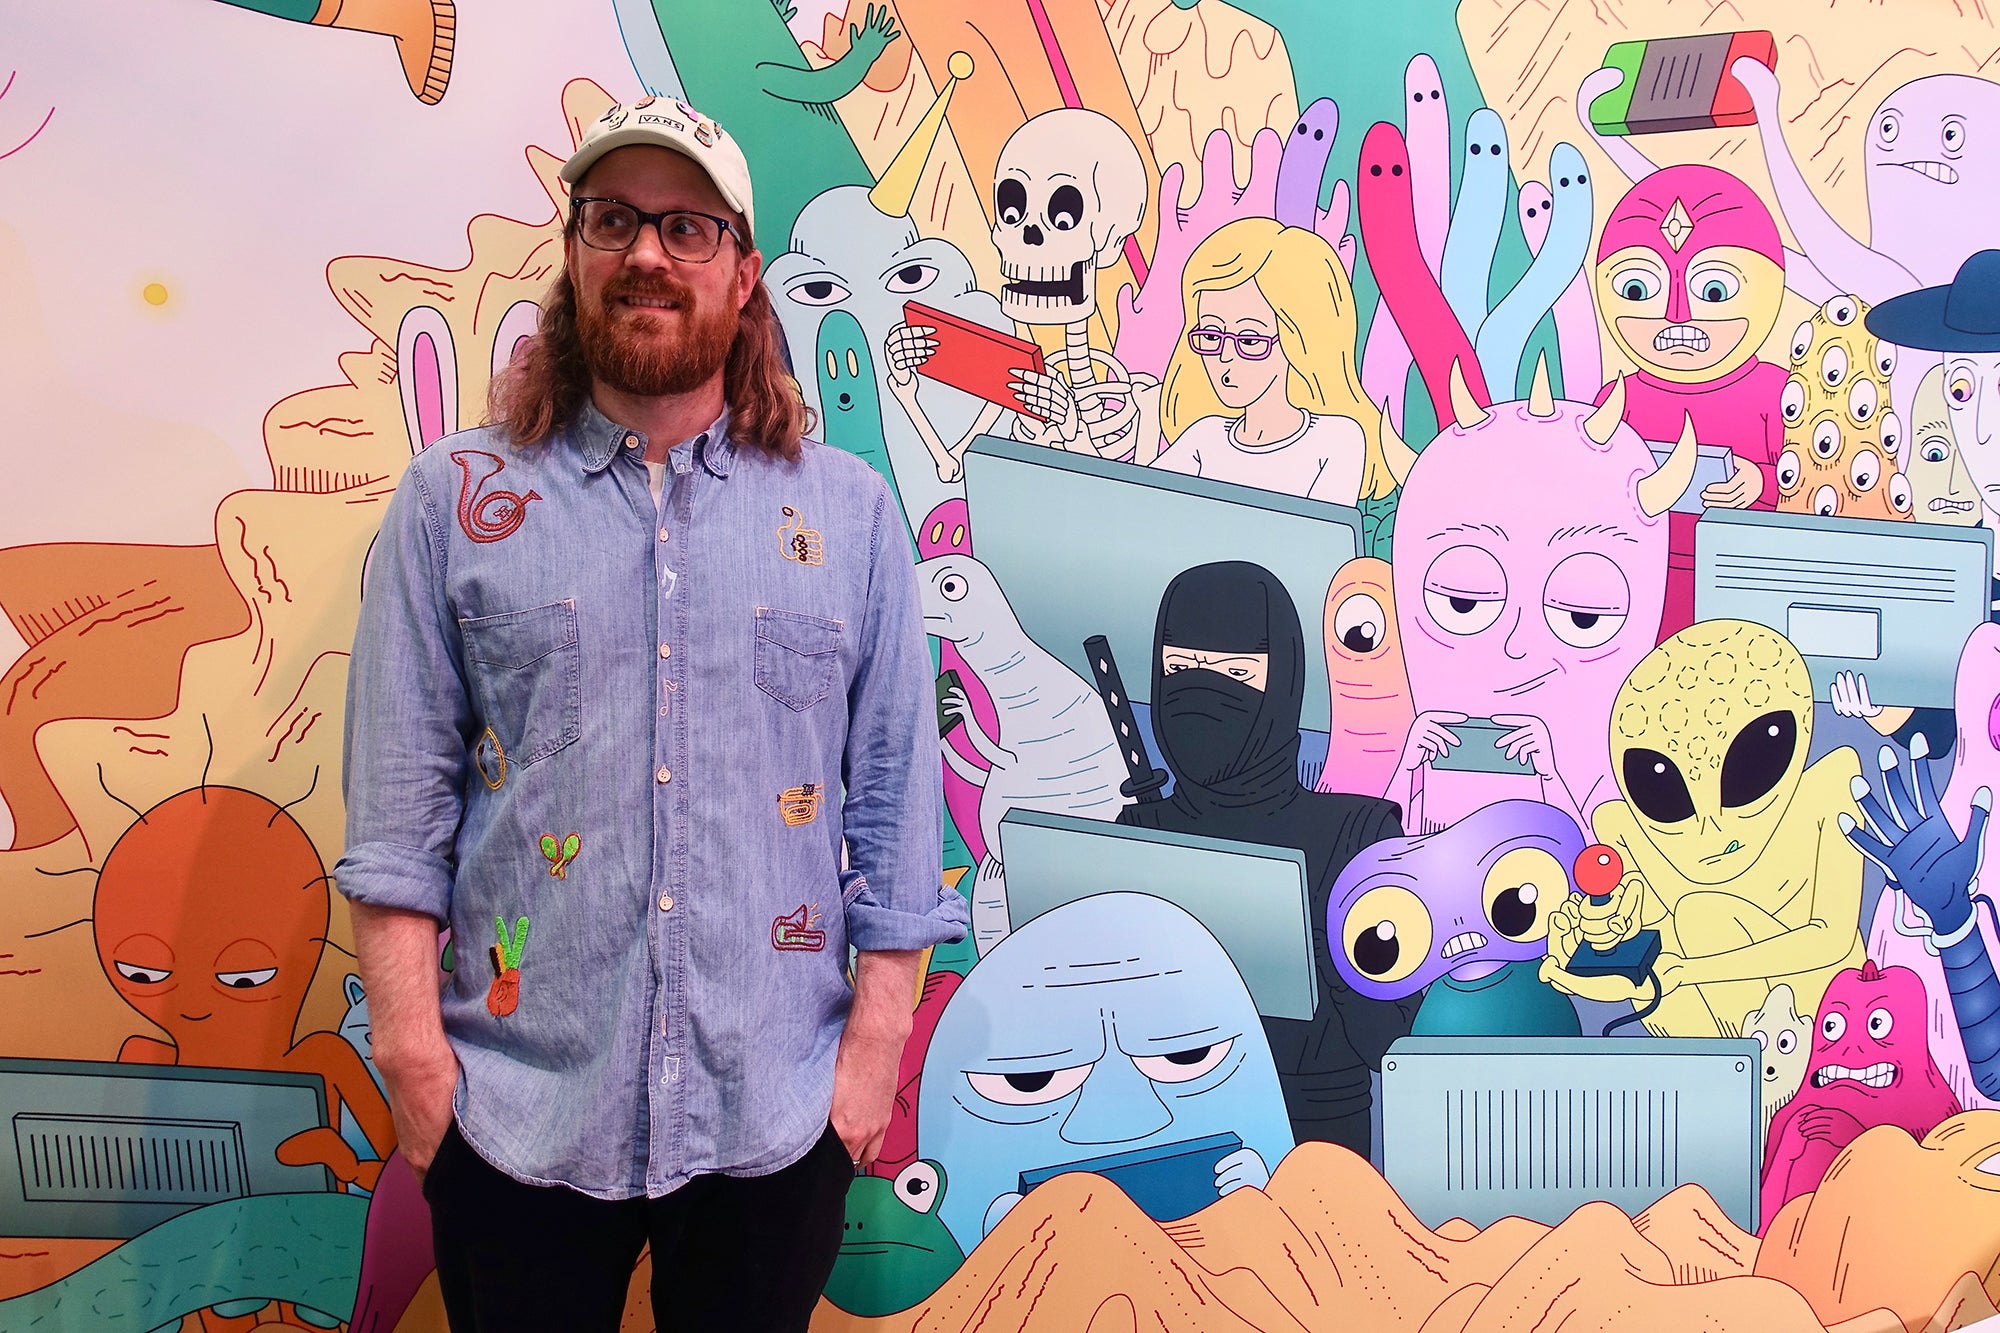 Andrew Rae | From Daydream & Imagination to Full-Time Illustration